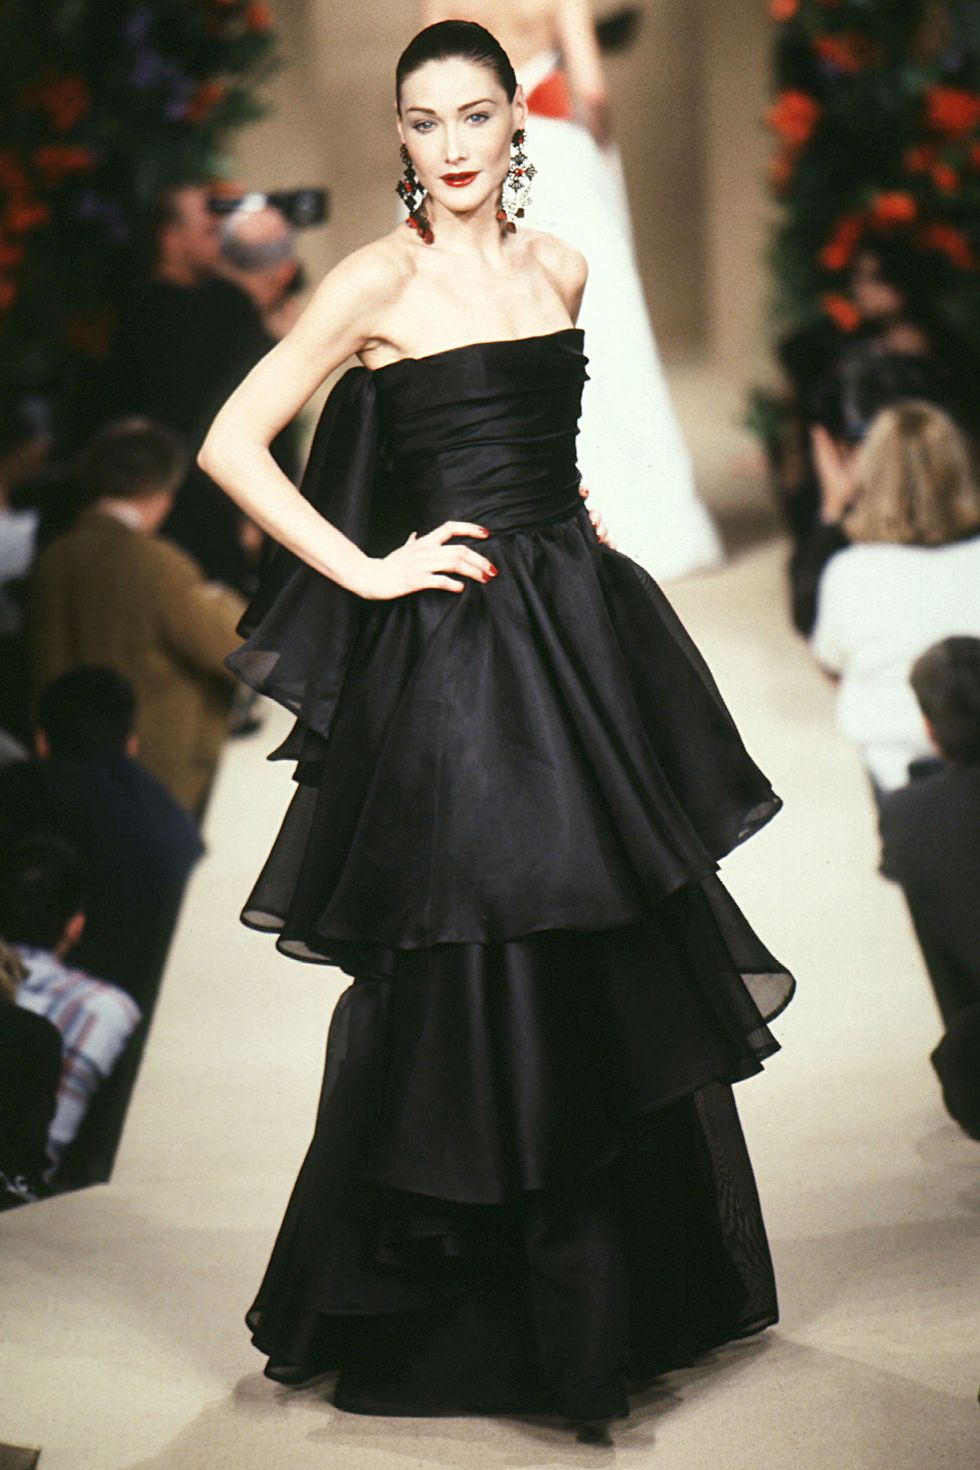 Here's What The Clothes at Fashion Week Looked Like in 1997